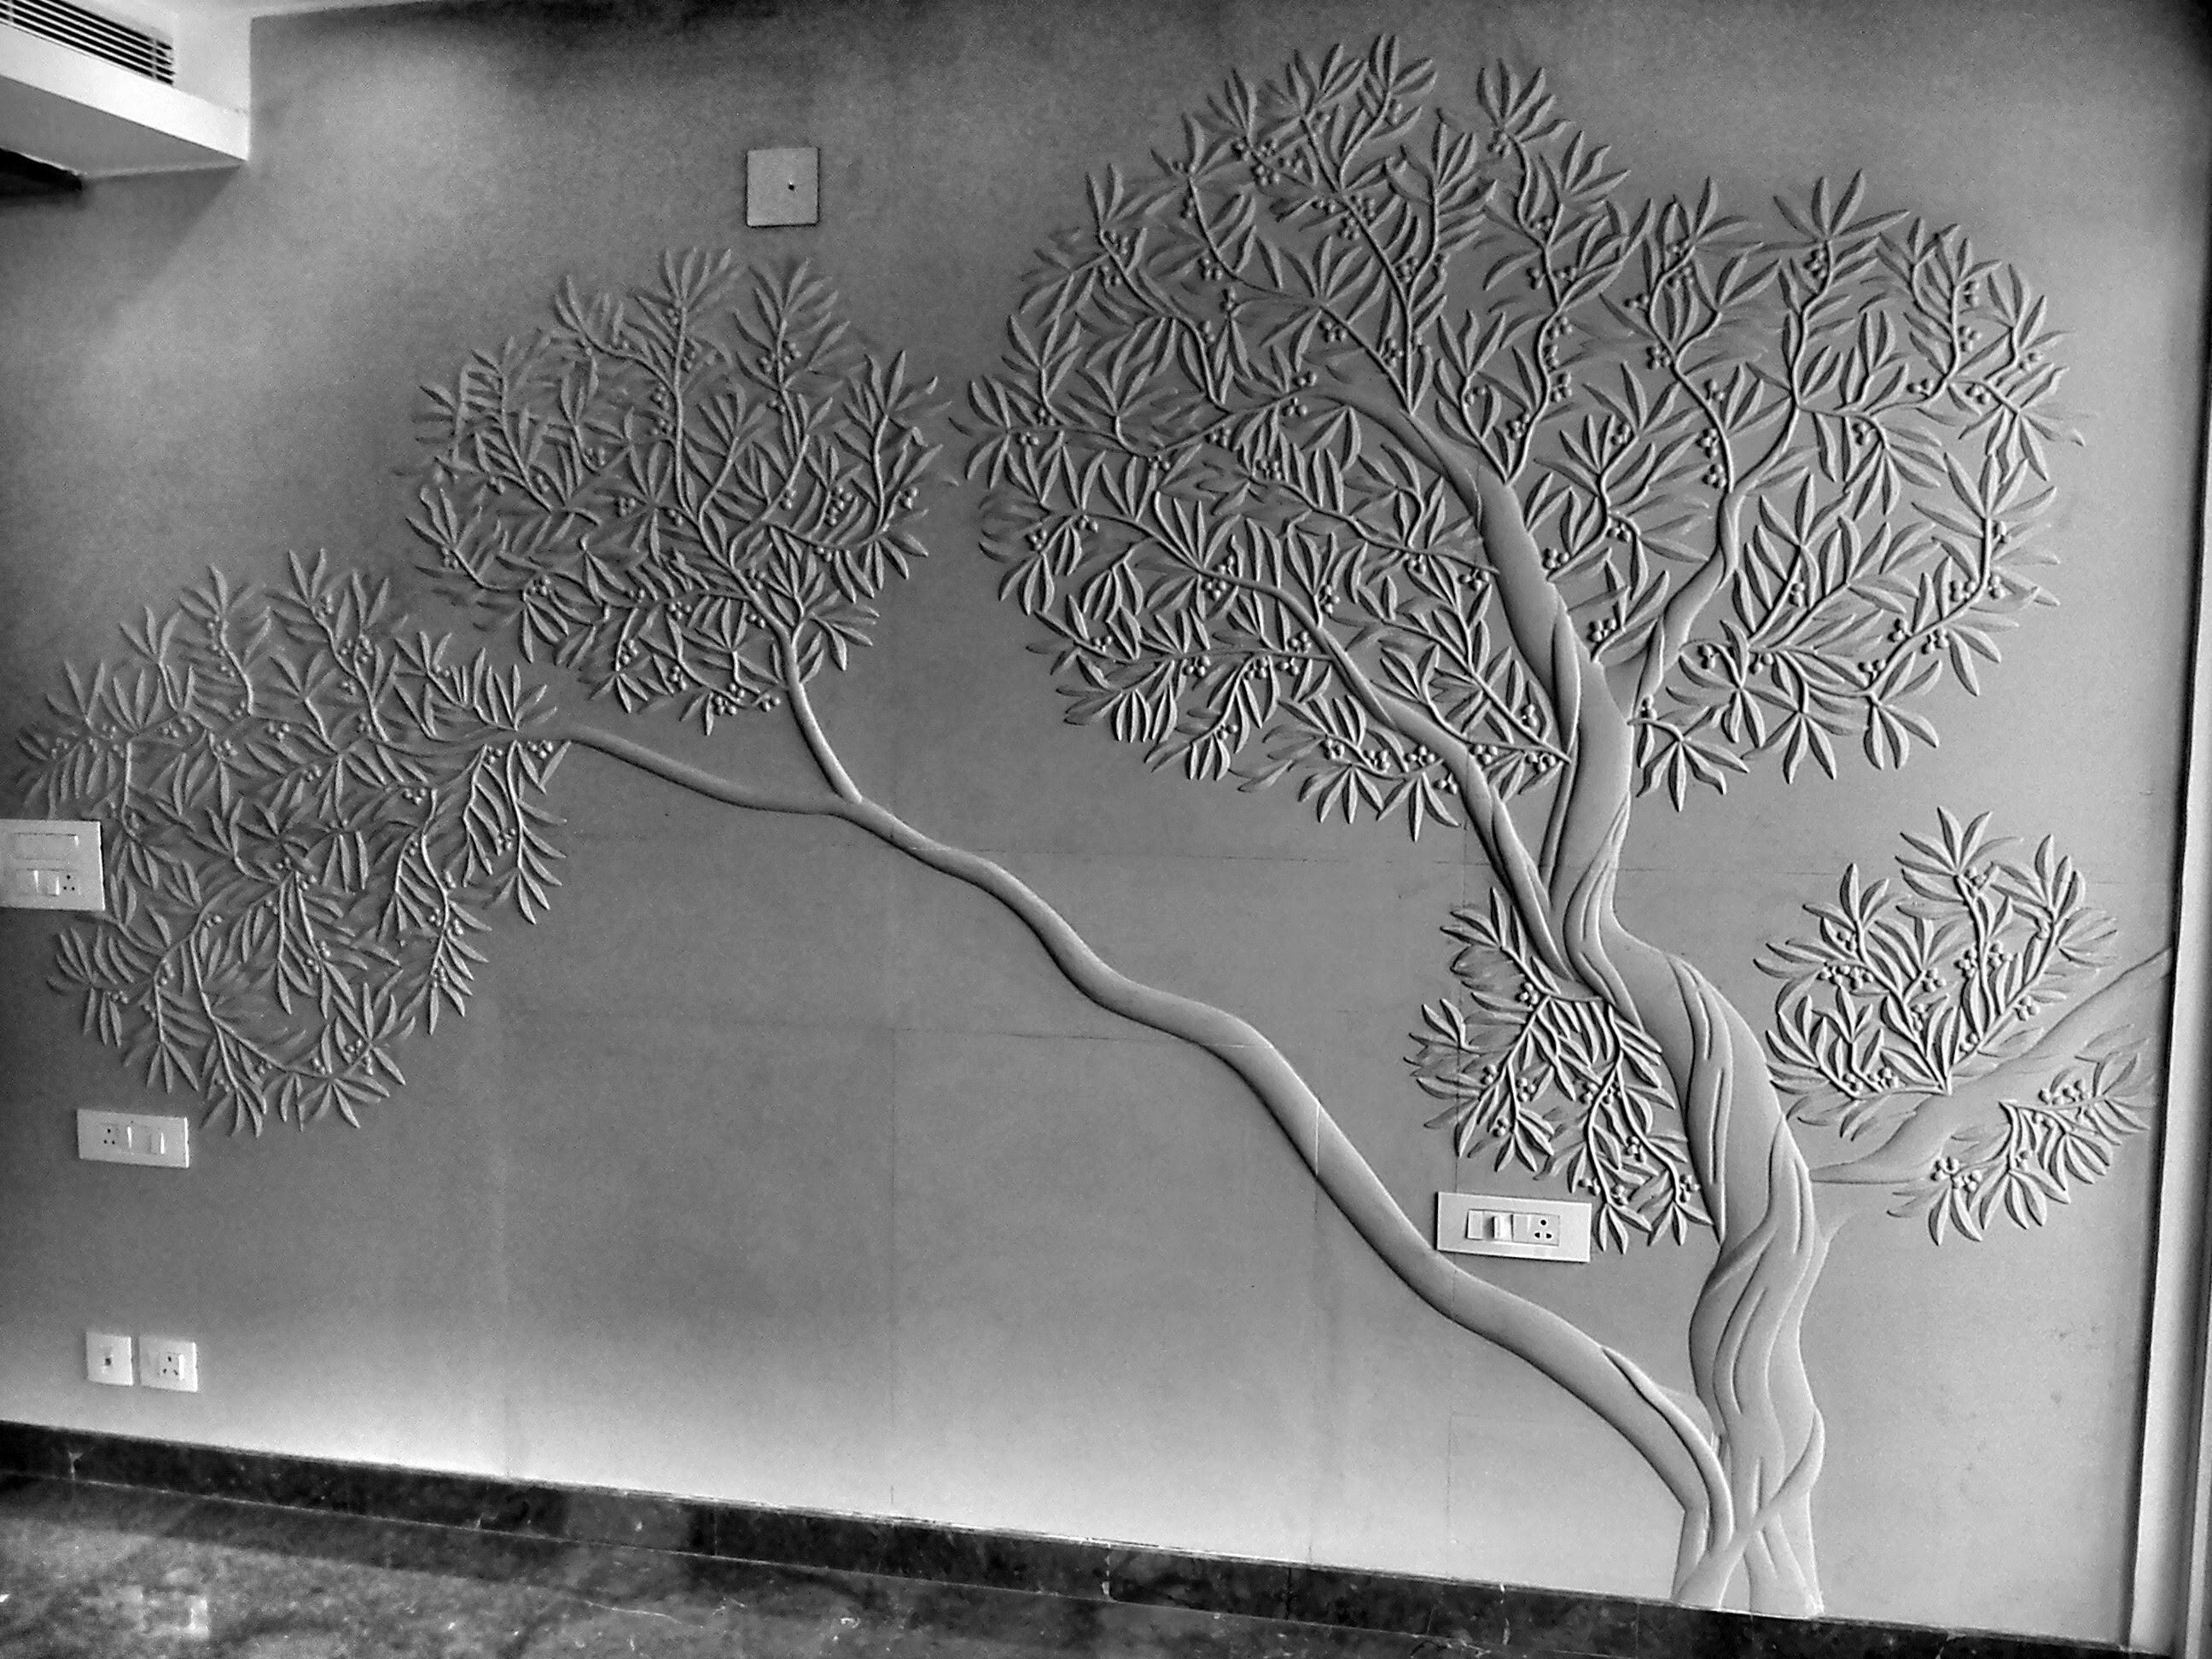 How to design olive tree# carving #stone#design#tree Mural# CNC ...